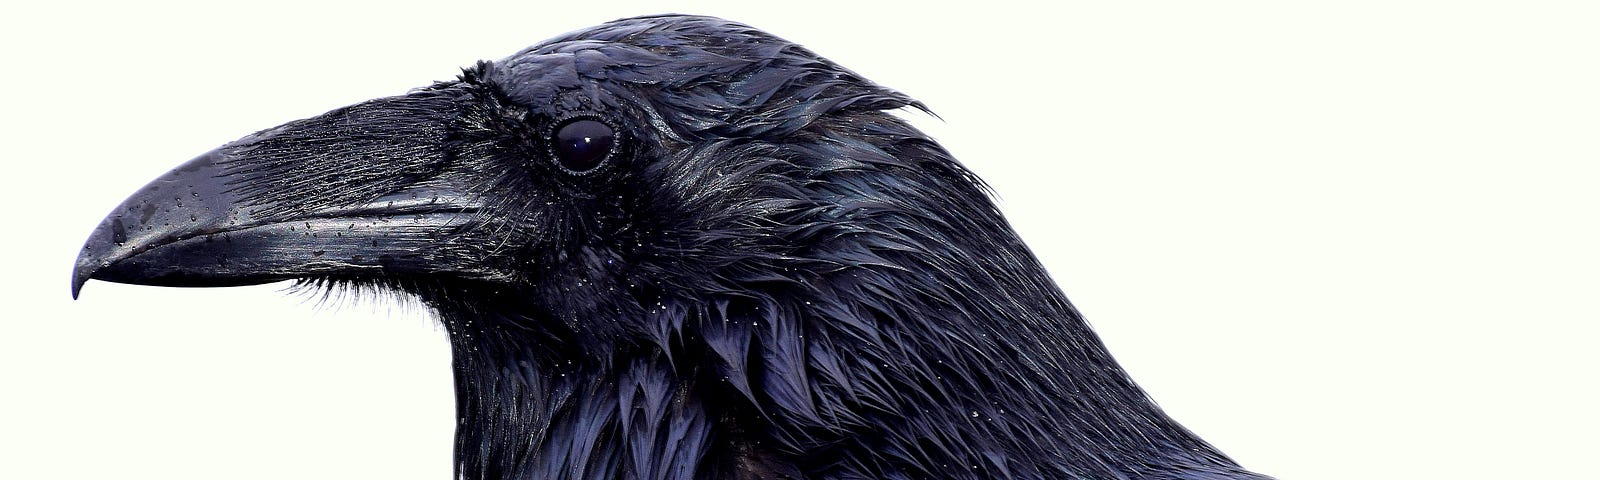 A frightening crow